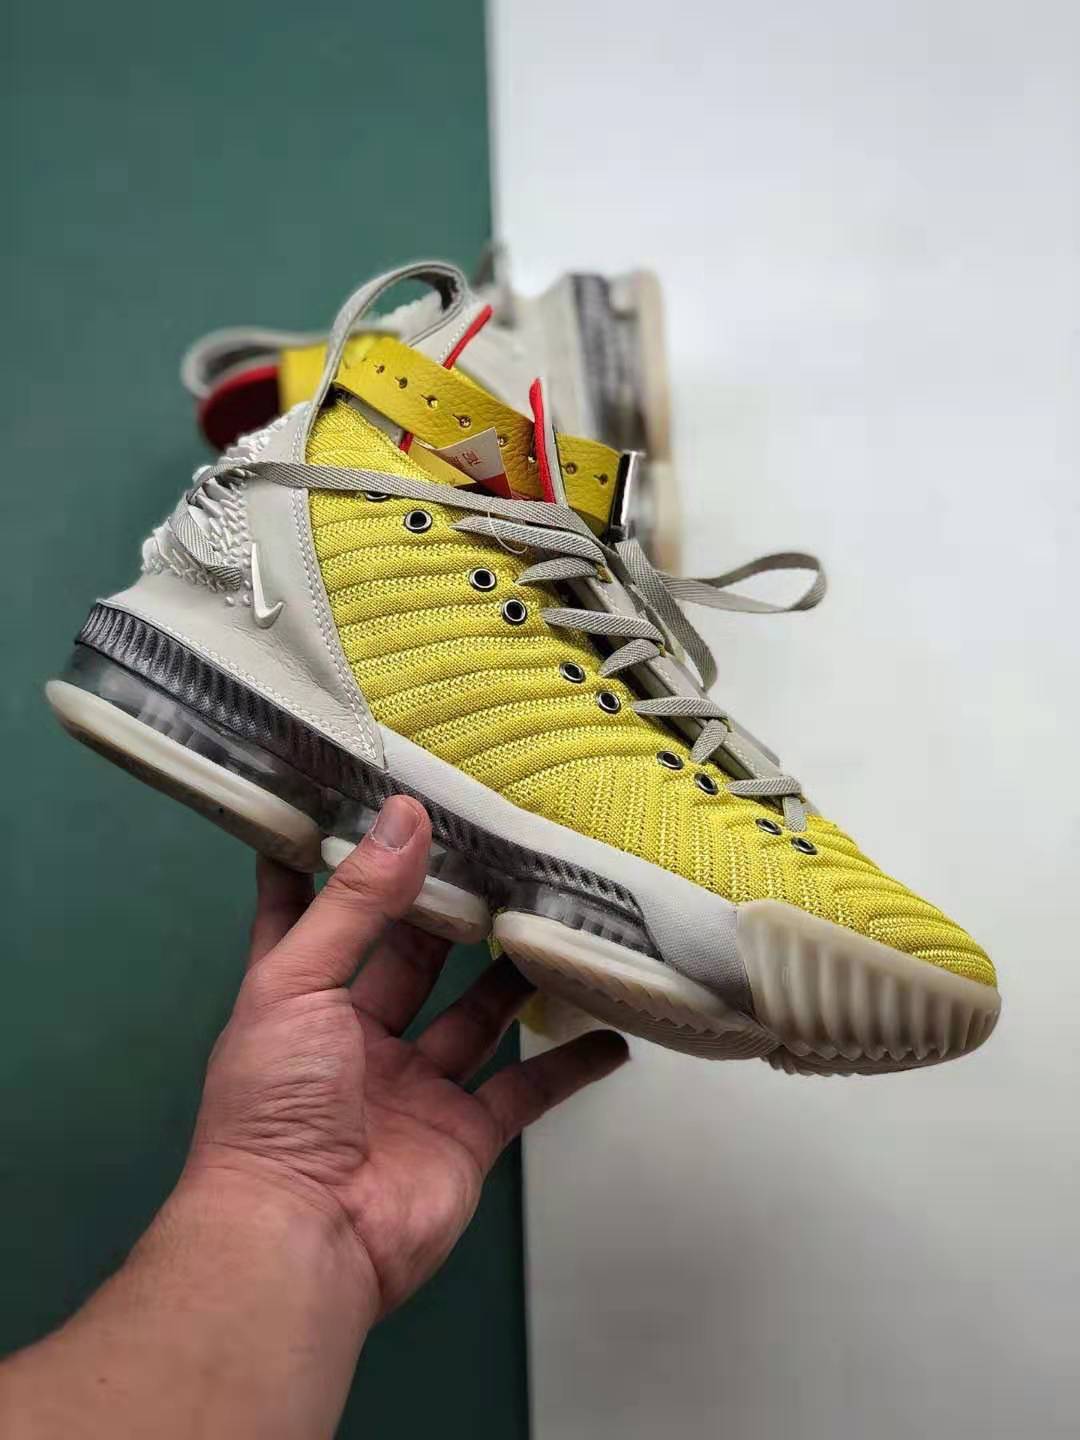 Nike LeBron 16 HFR Harlem Stage 16 CI1144-700: Explore the Iconic Collaboration with Style and Performance